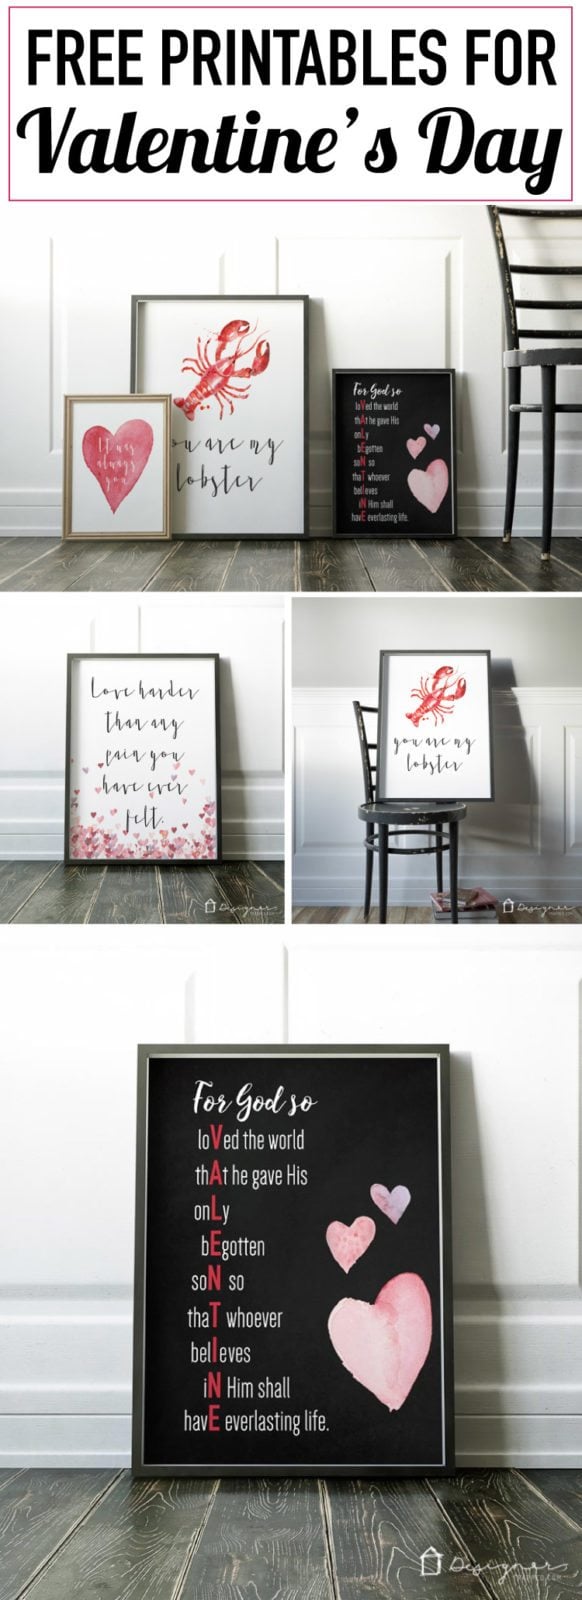 OMG, these really are the best Valentine's Day printables I have ever seen! They are perfect. And I love that they are free Valentine's printables. Can't wait to print them off and frame a few this year!